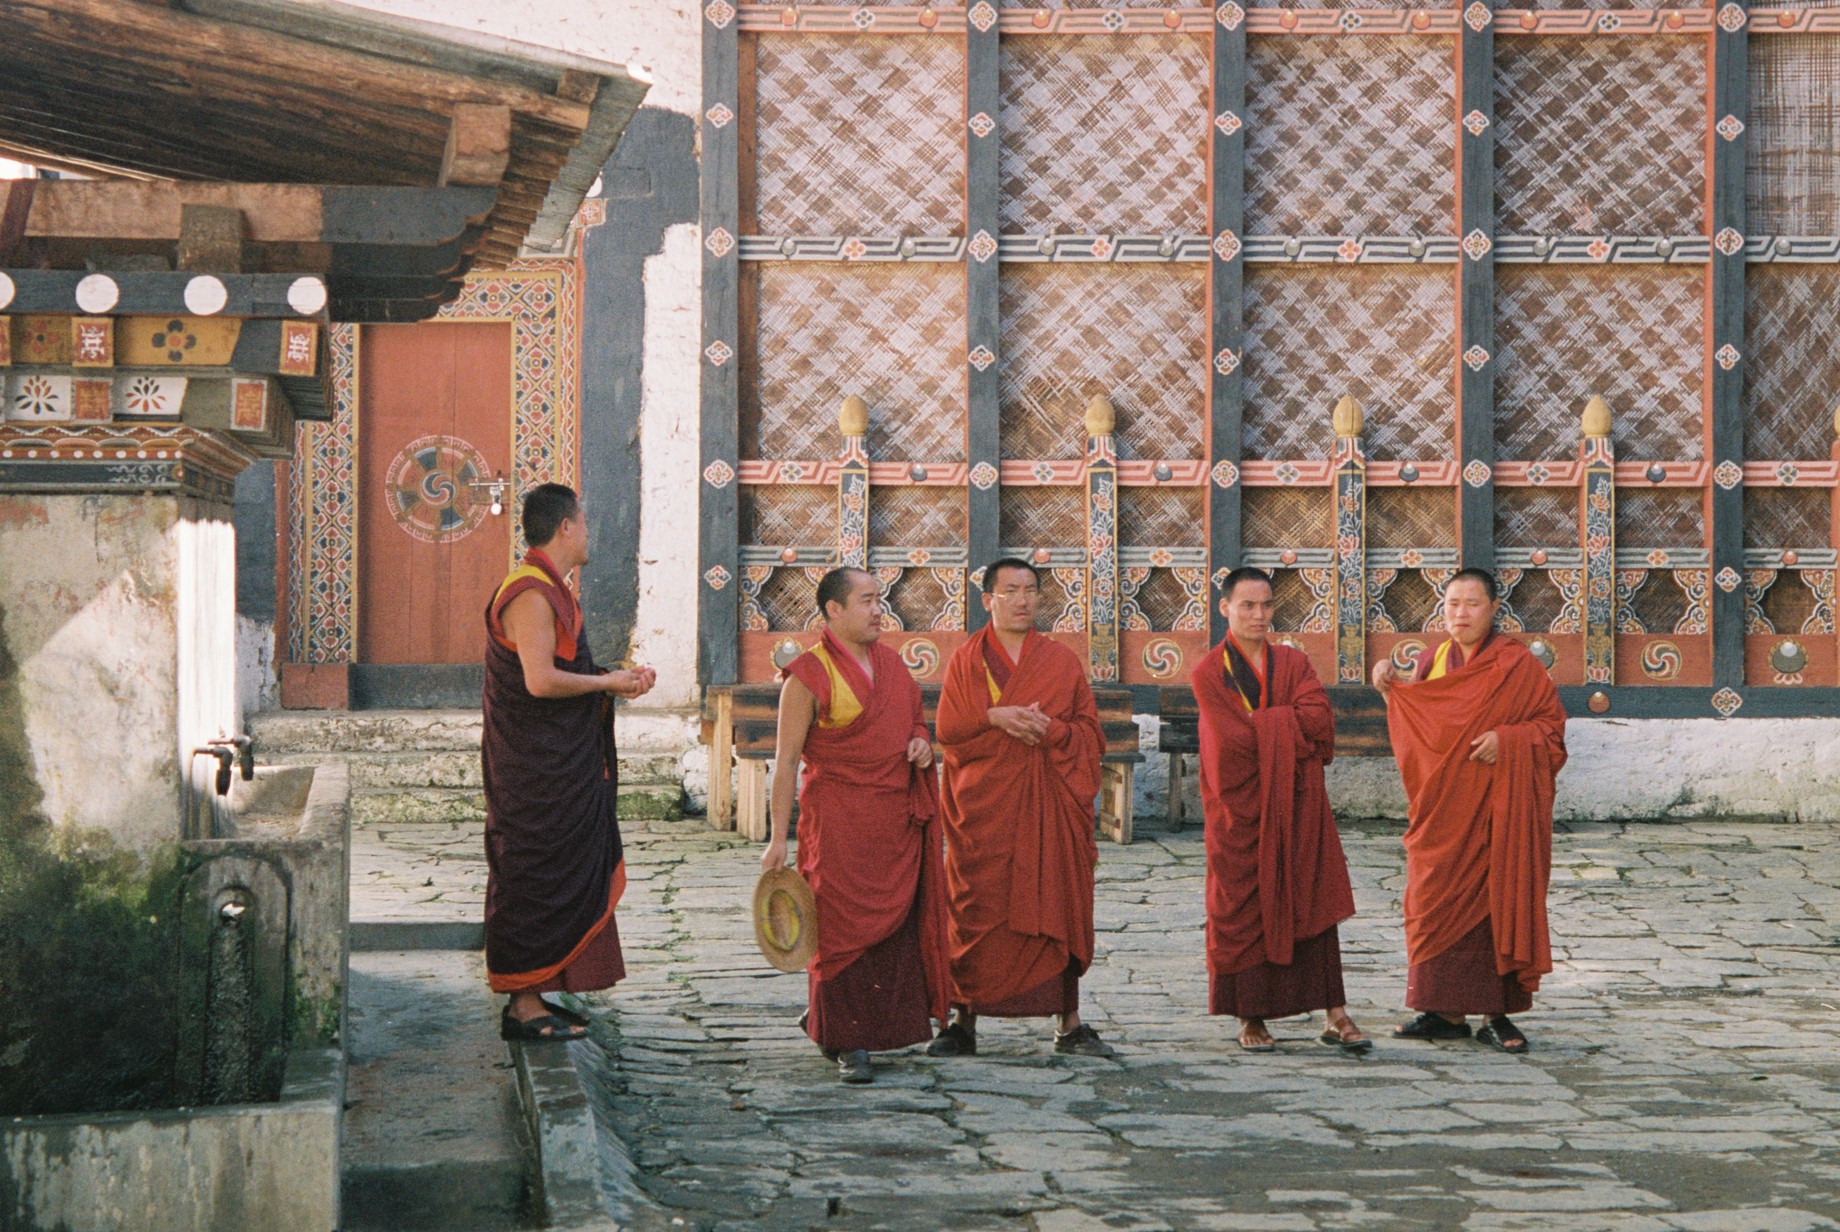 the monks are dressed in traditional clothing for the ceremony